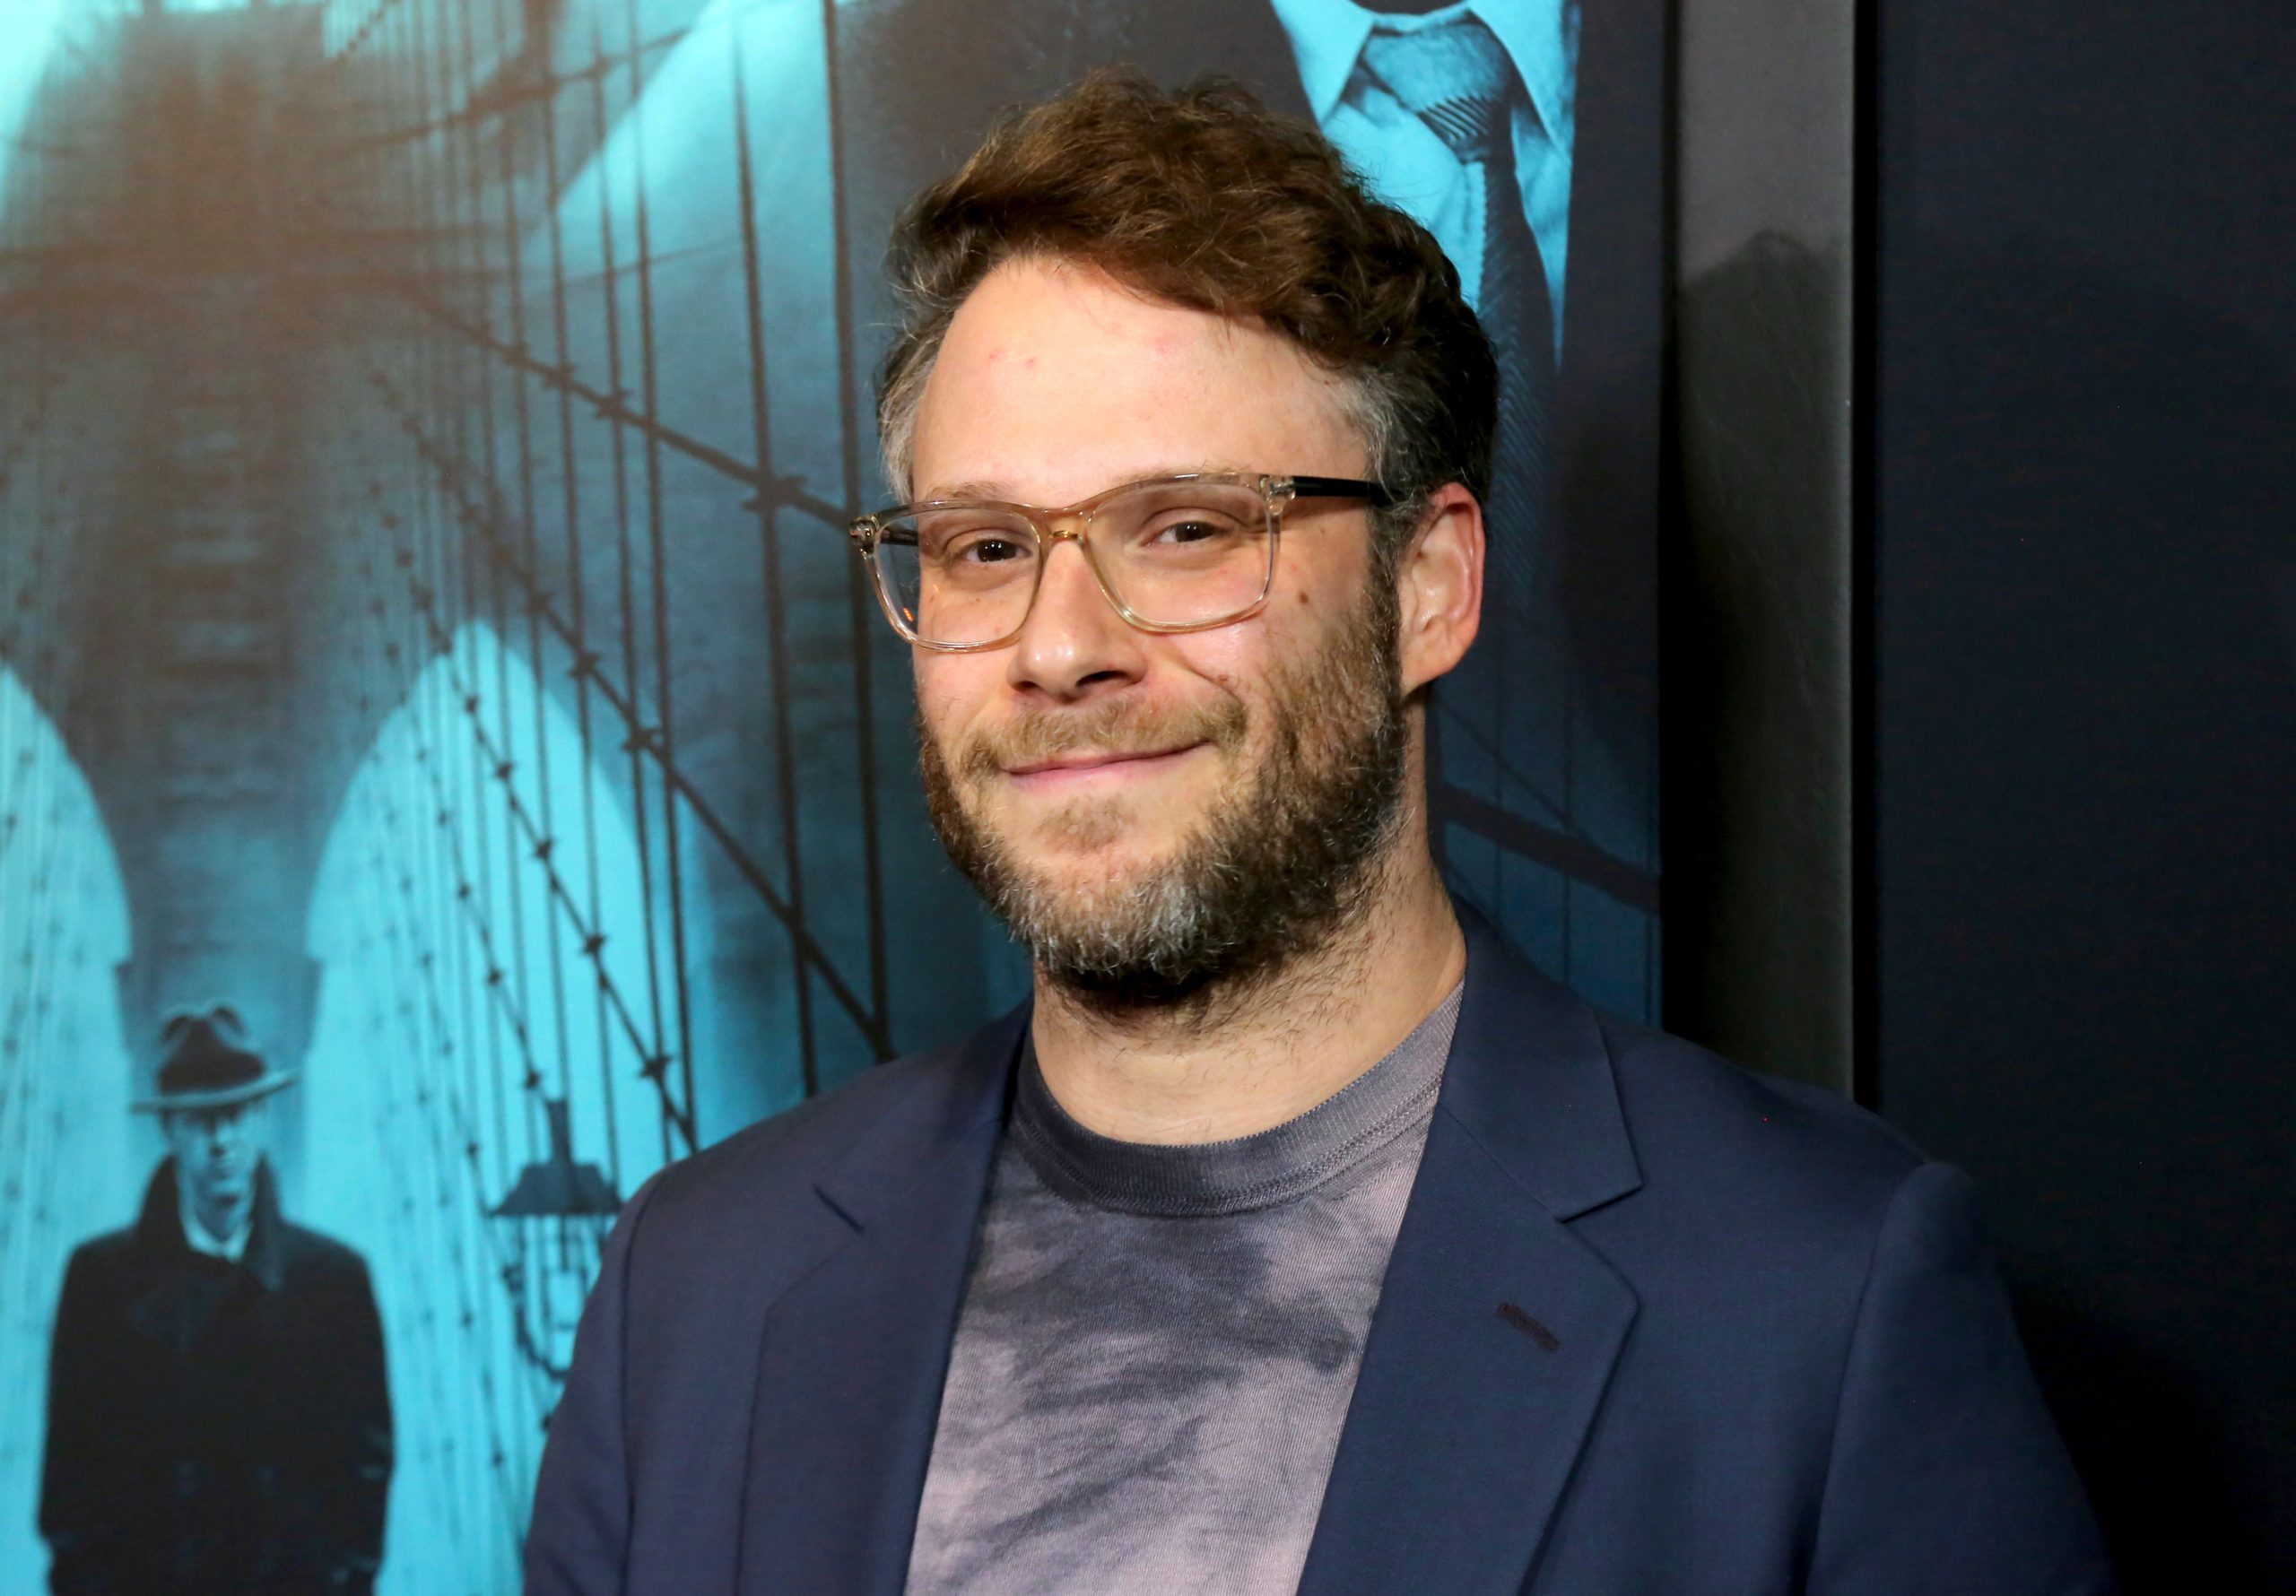 Seth Rogen called ‘privileged’ after Twitter dispute about LA crime